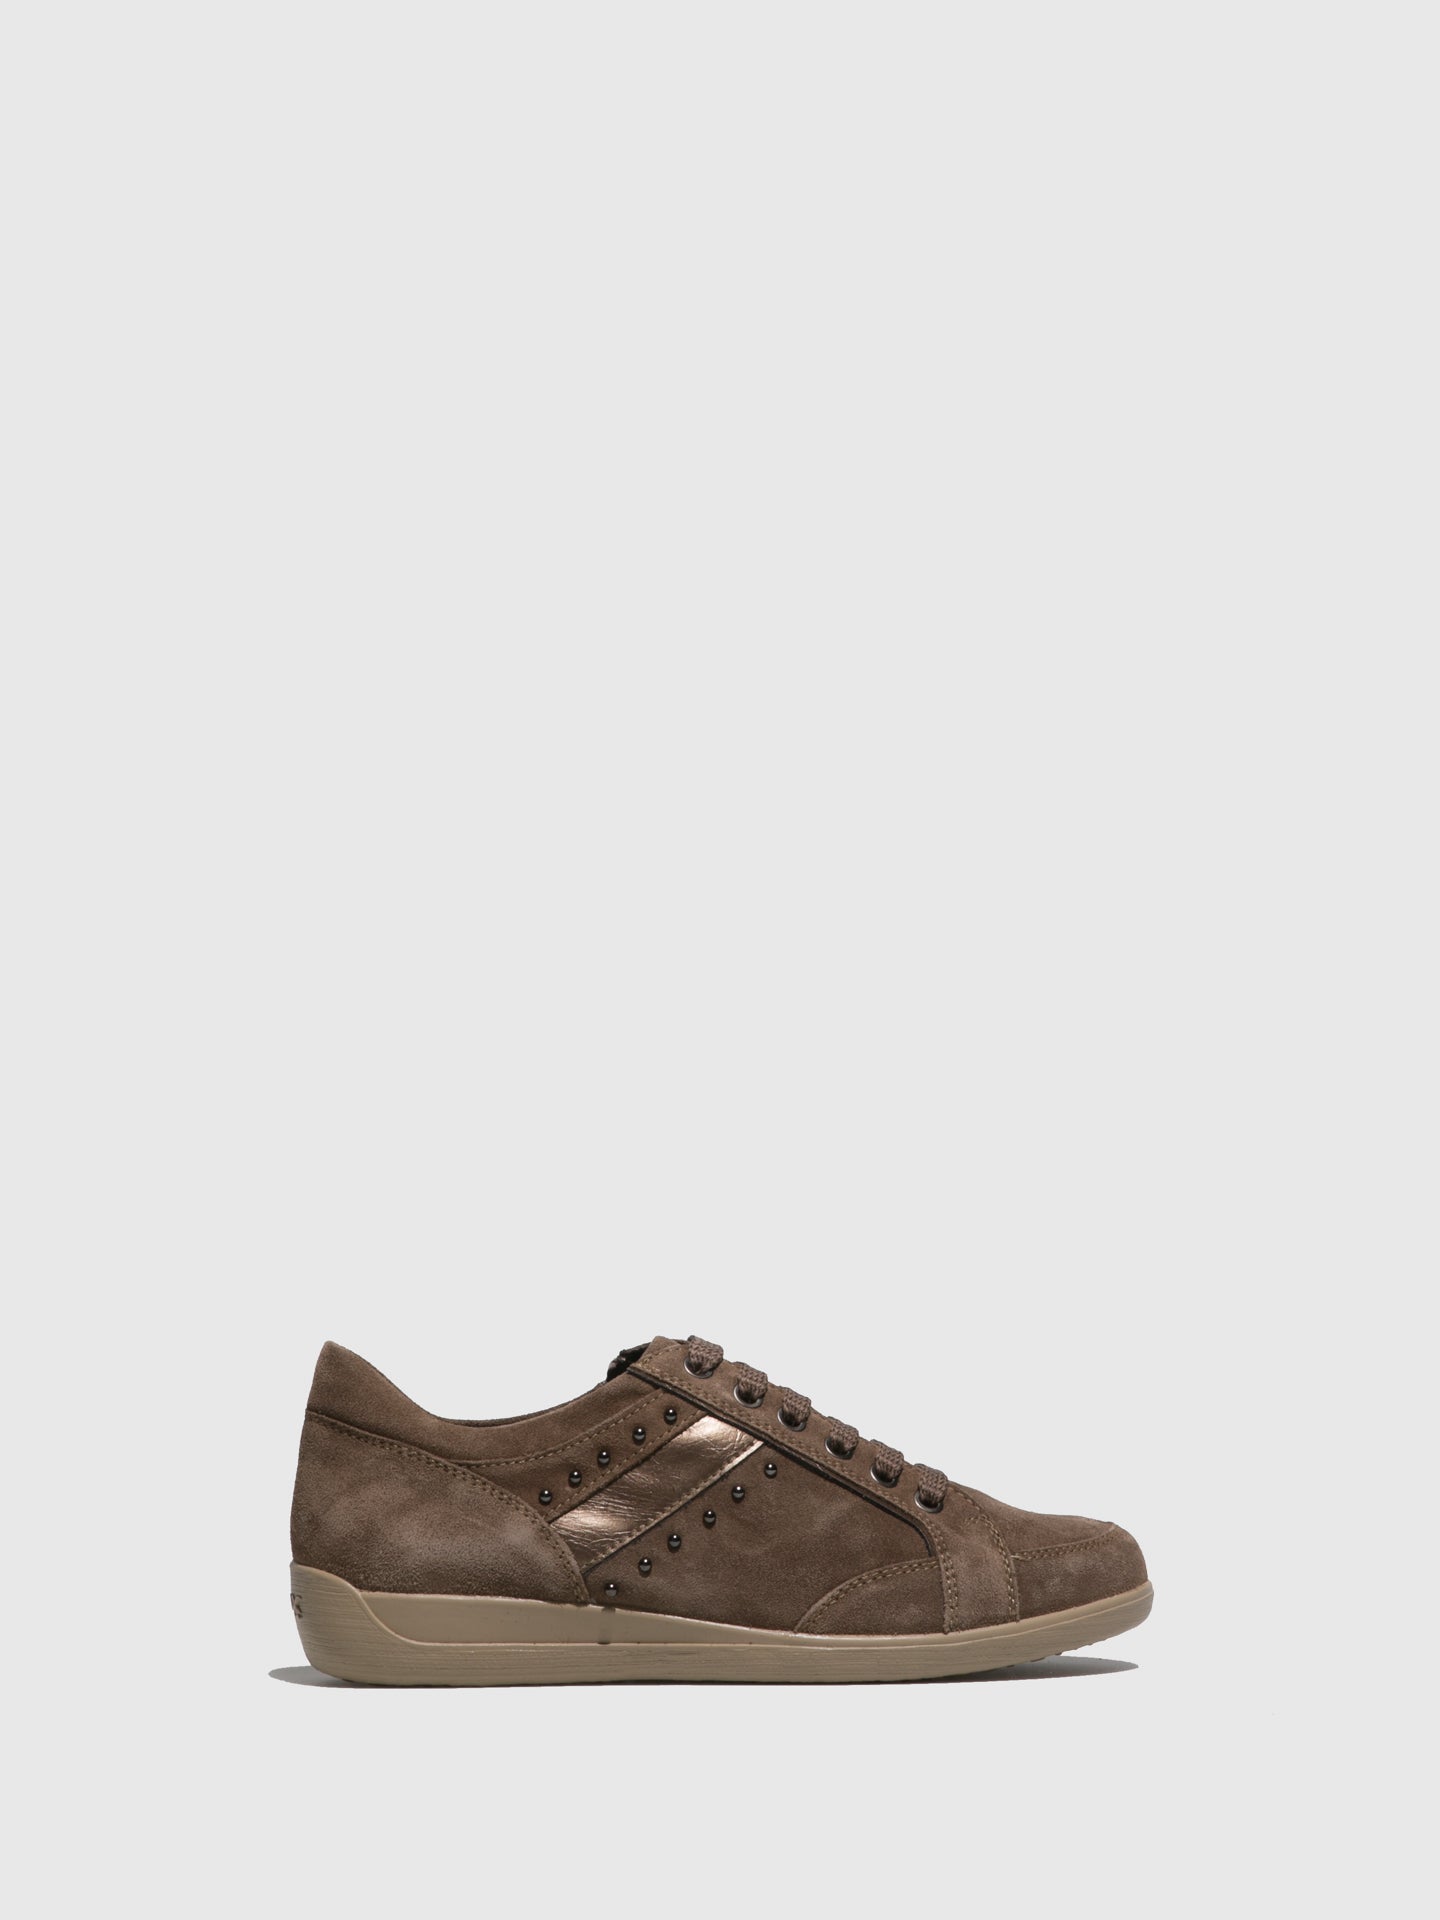 Geox Camel Lace-up Shoes